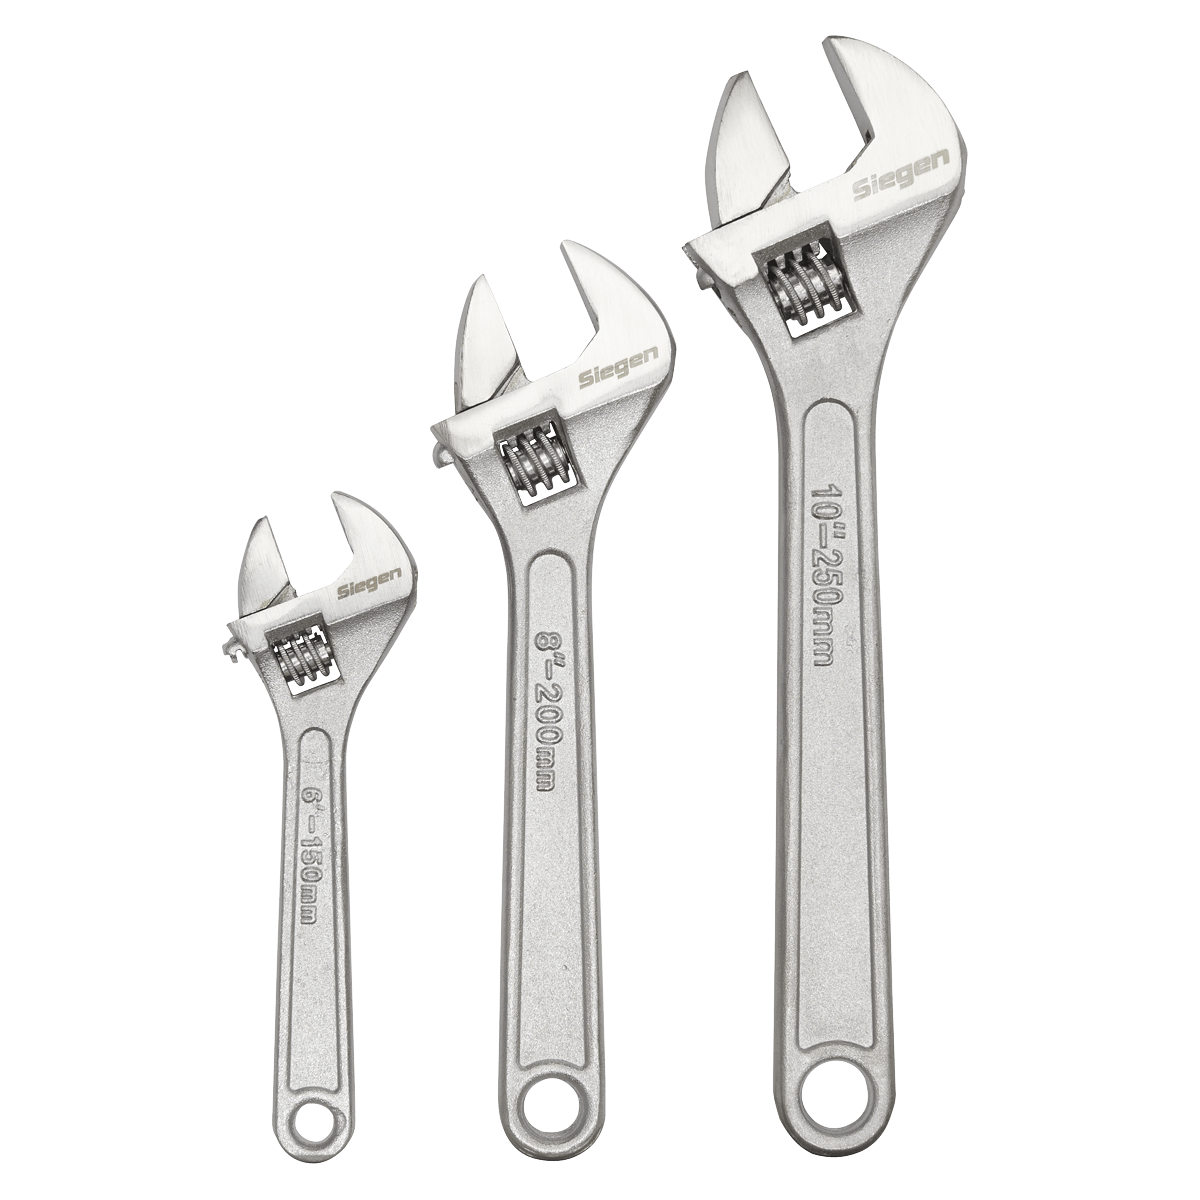 Siegen Combination Spanner 25mm Individual Combination Spanner/Wrench S0425 